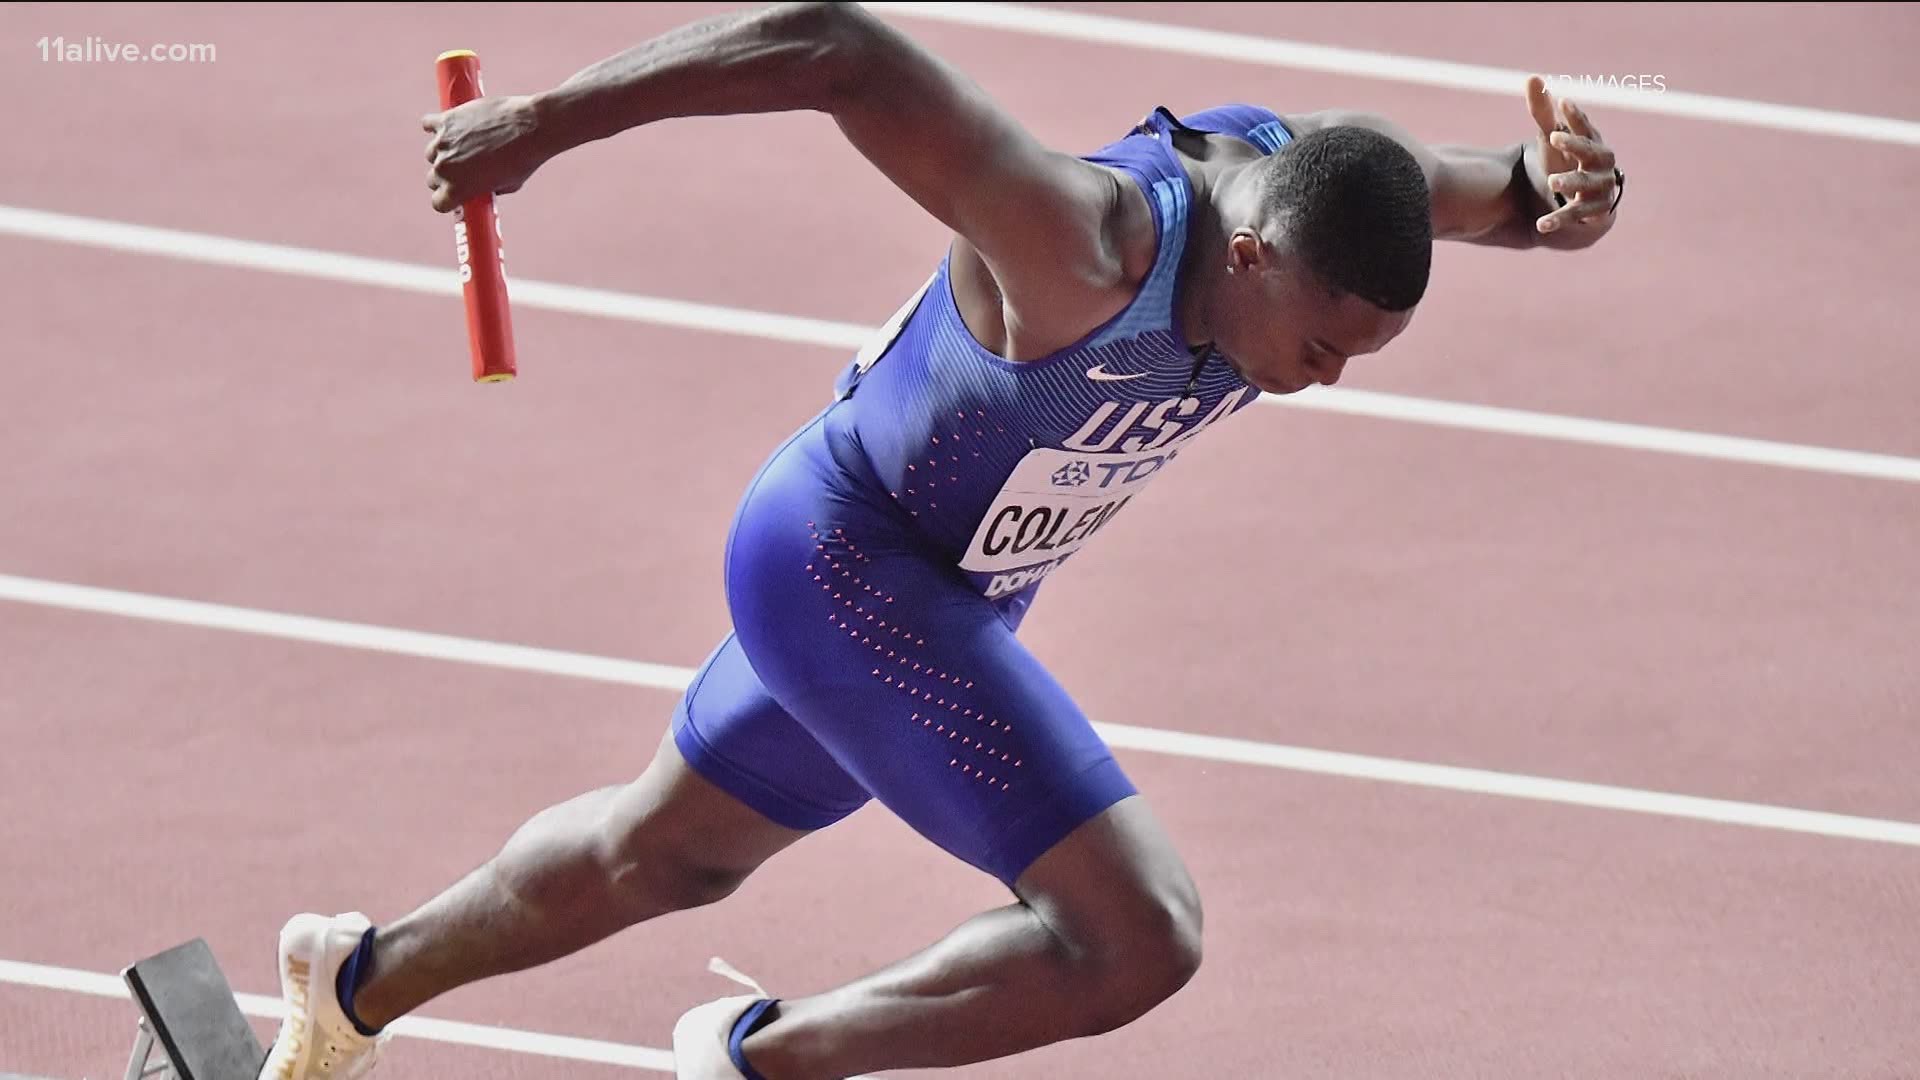 The event is named for metro Atlanta native and world champion sprinter Christian Coleman.